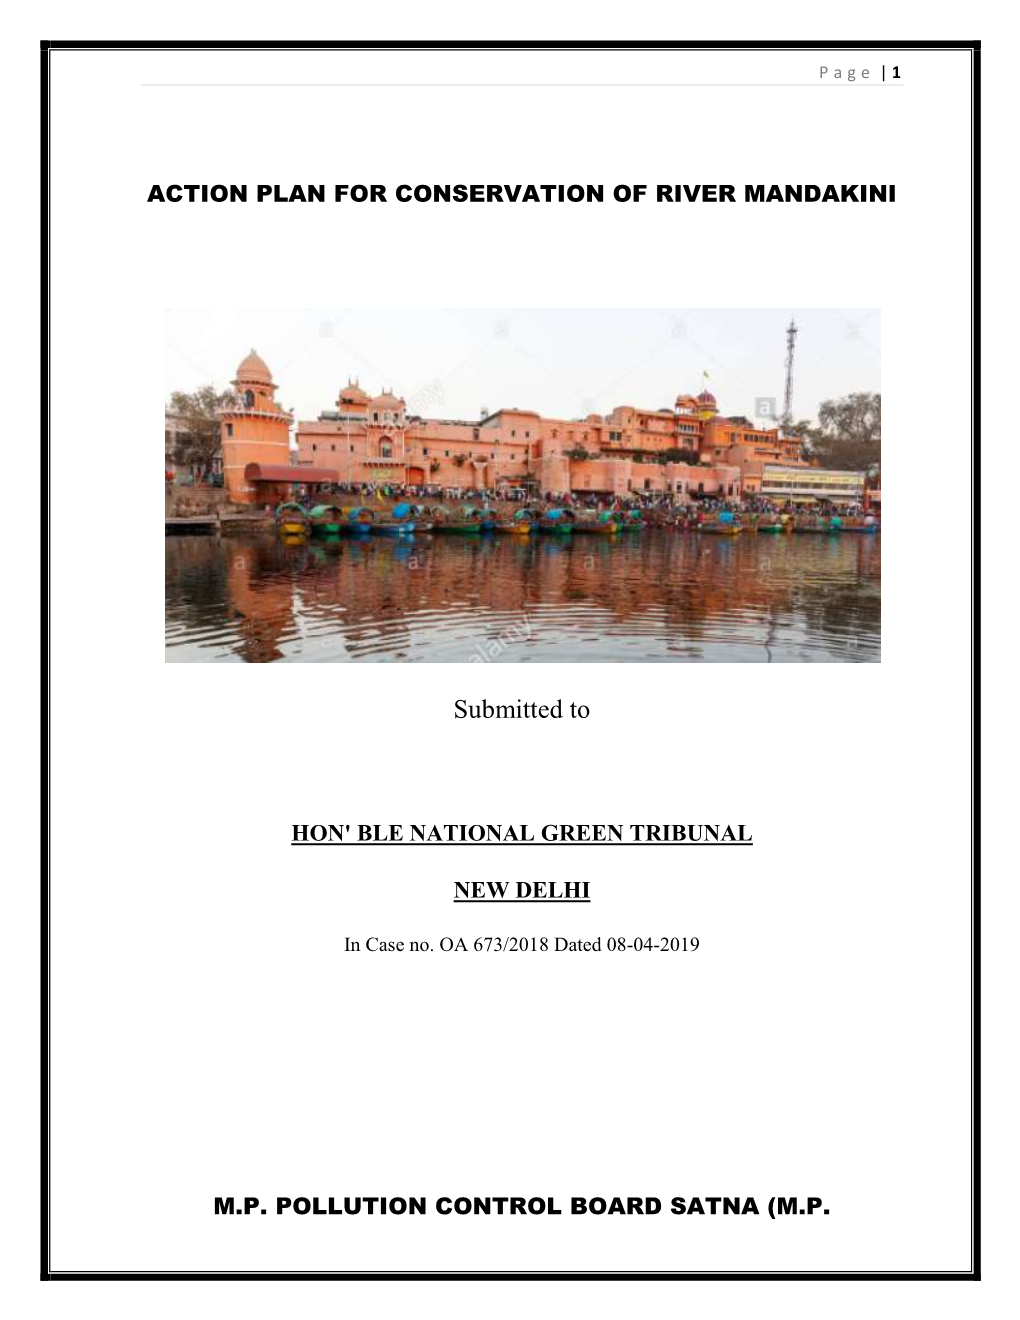 Action Plan for Conservation of River Mandakini